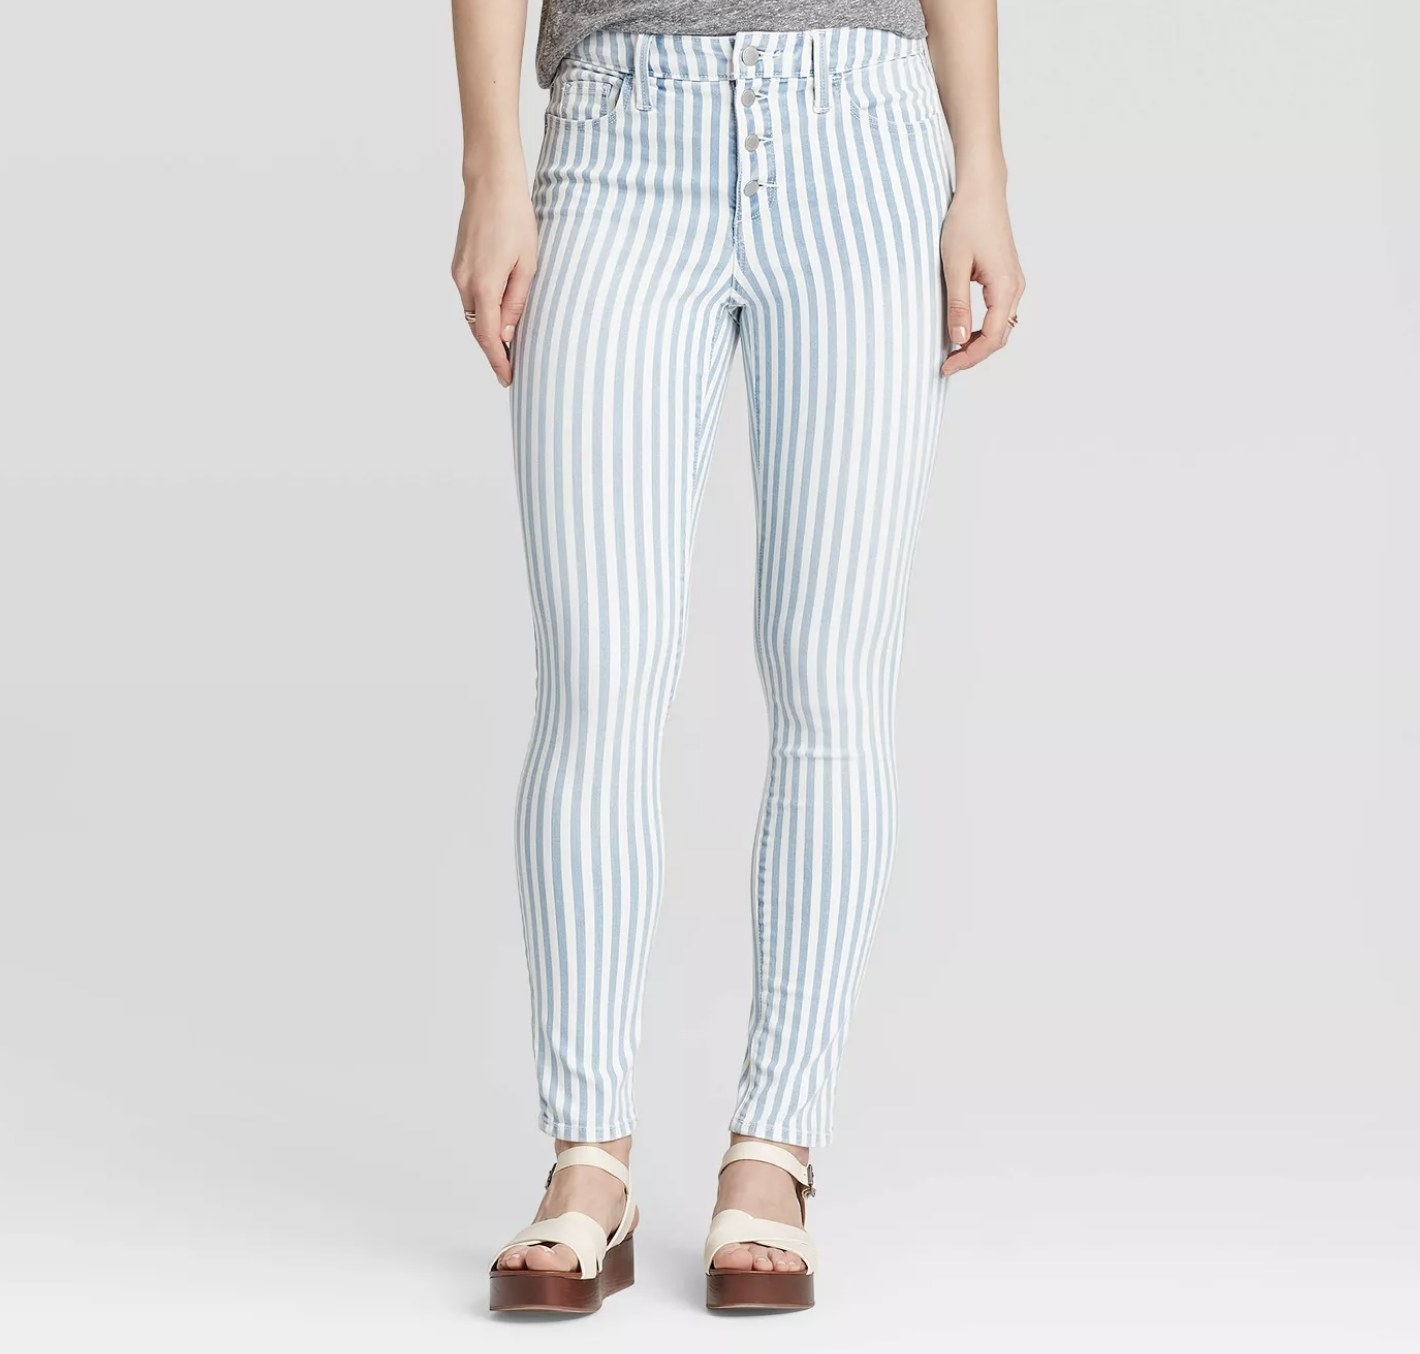 The blue and white vertical-striped pants 